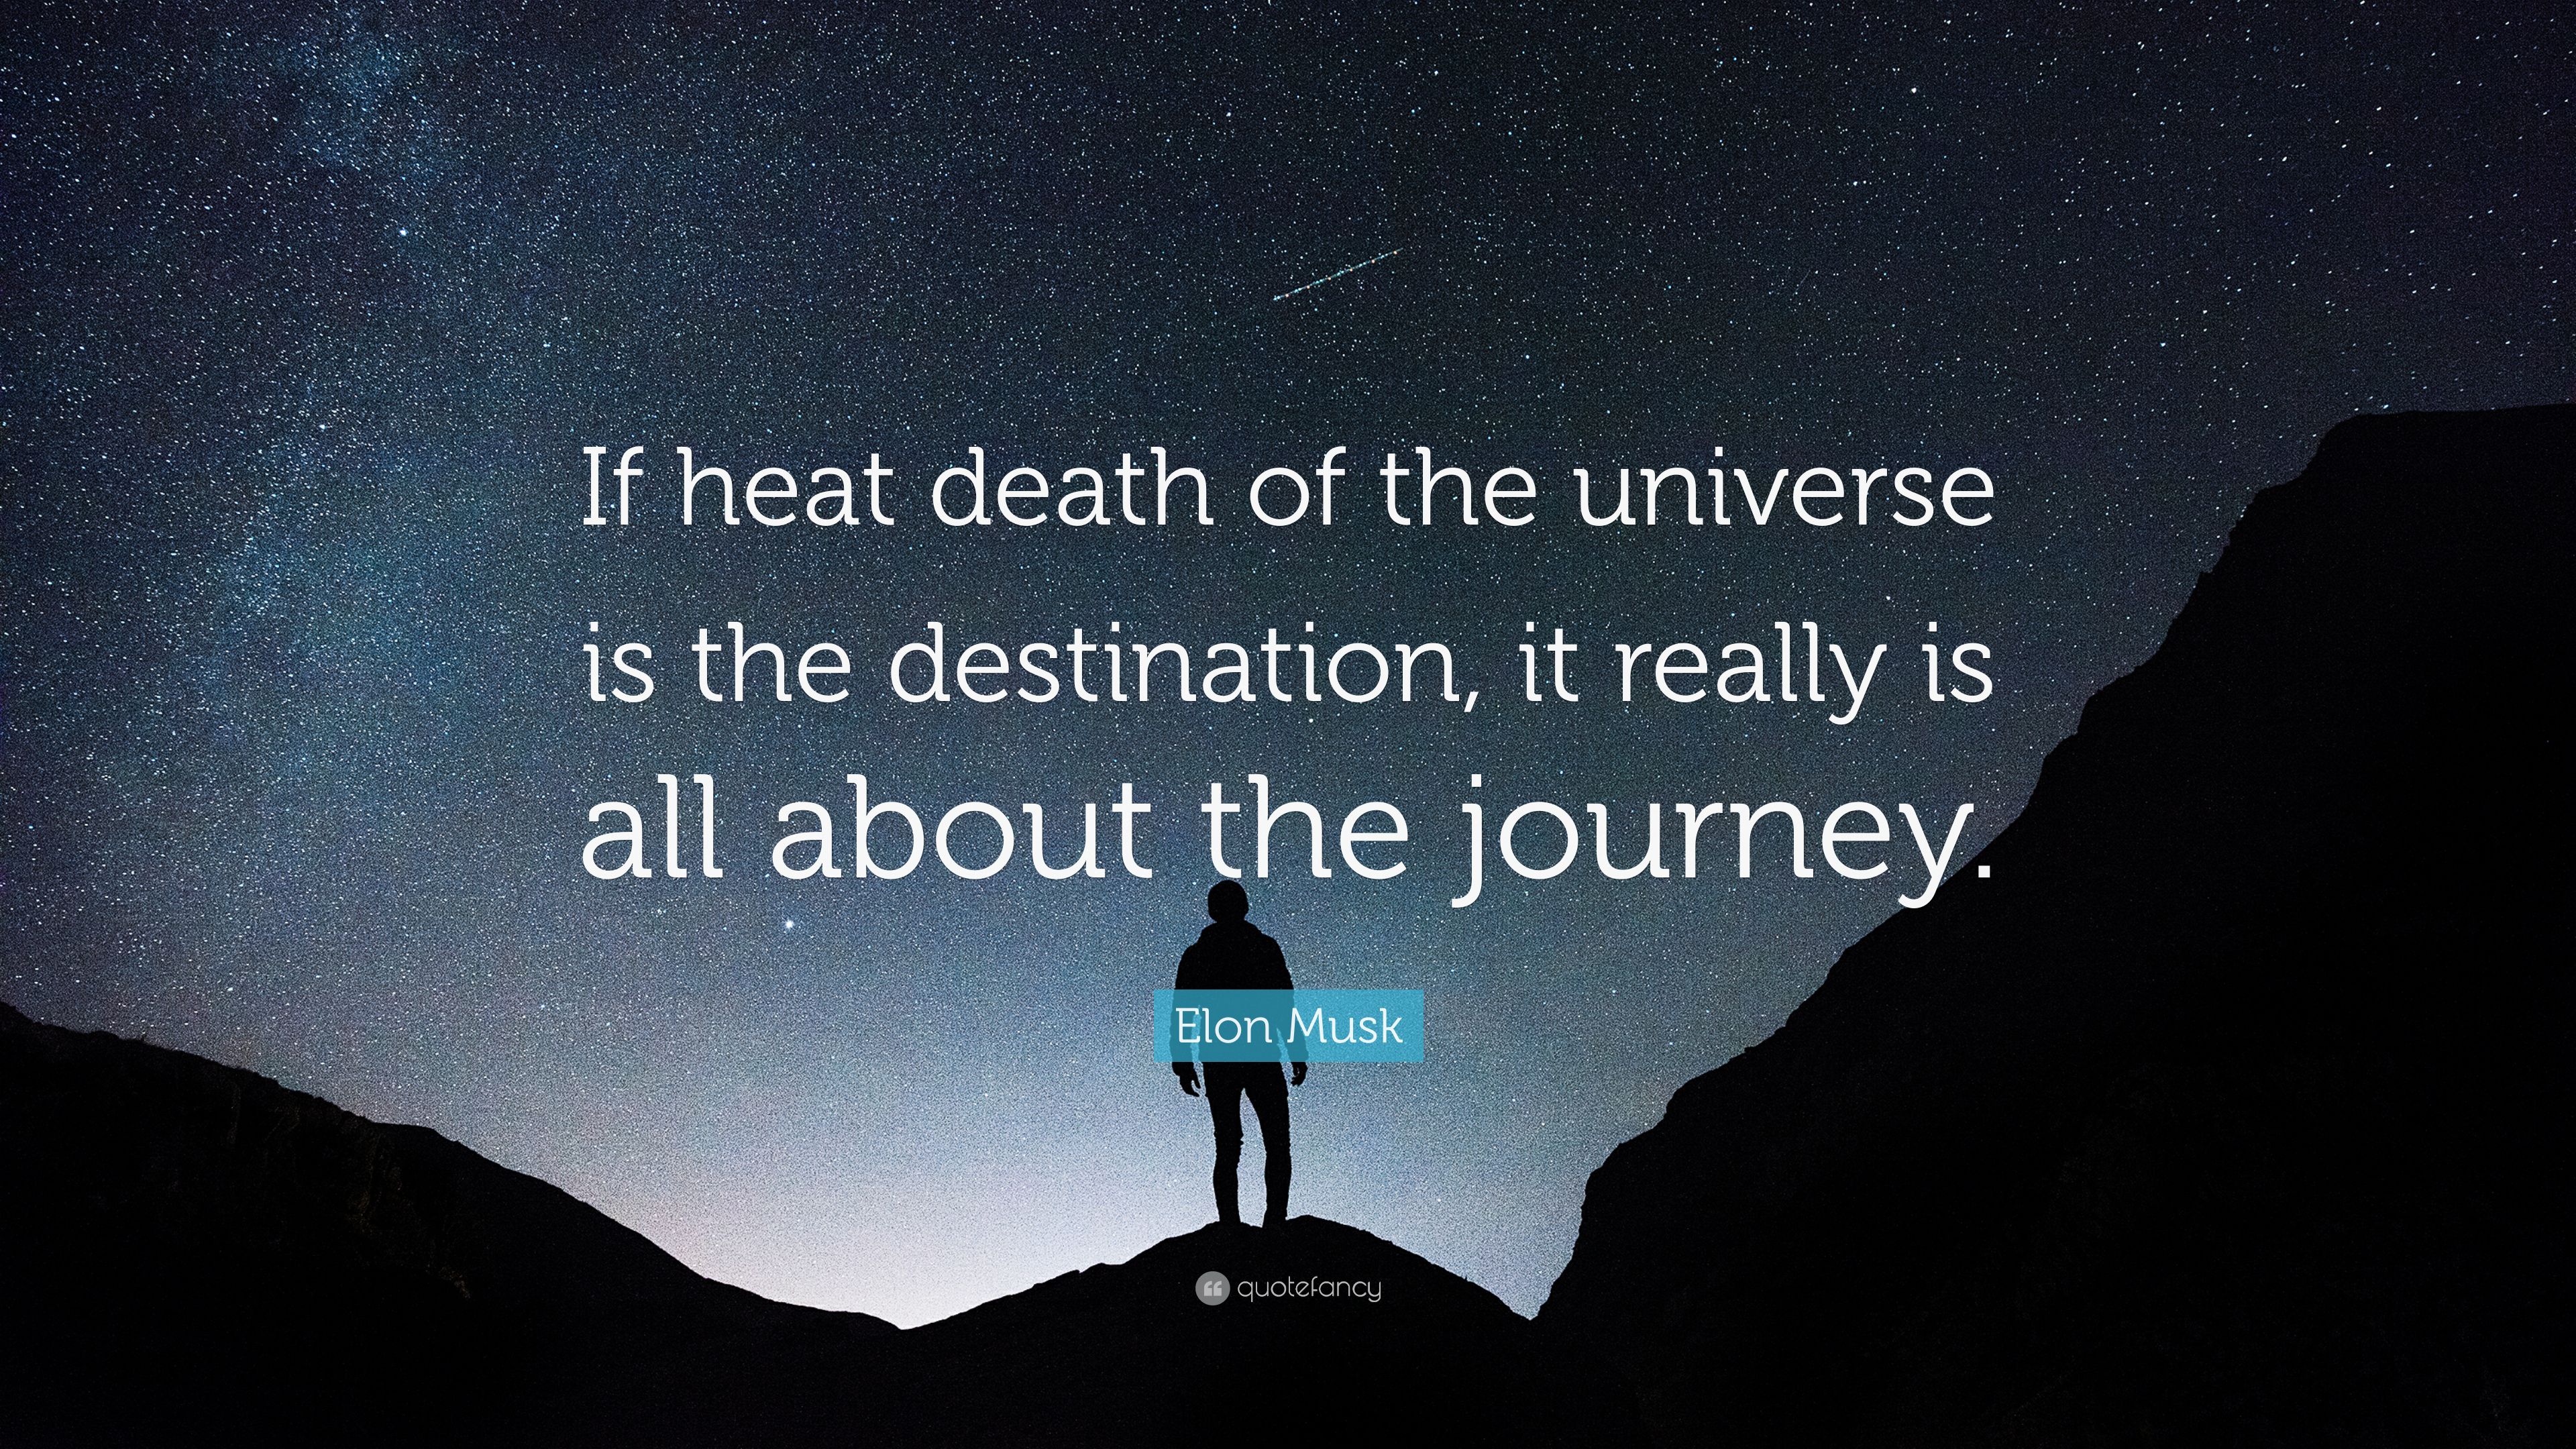 Elon Musk Quote: “If heat death of the universe is the destination